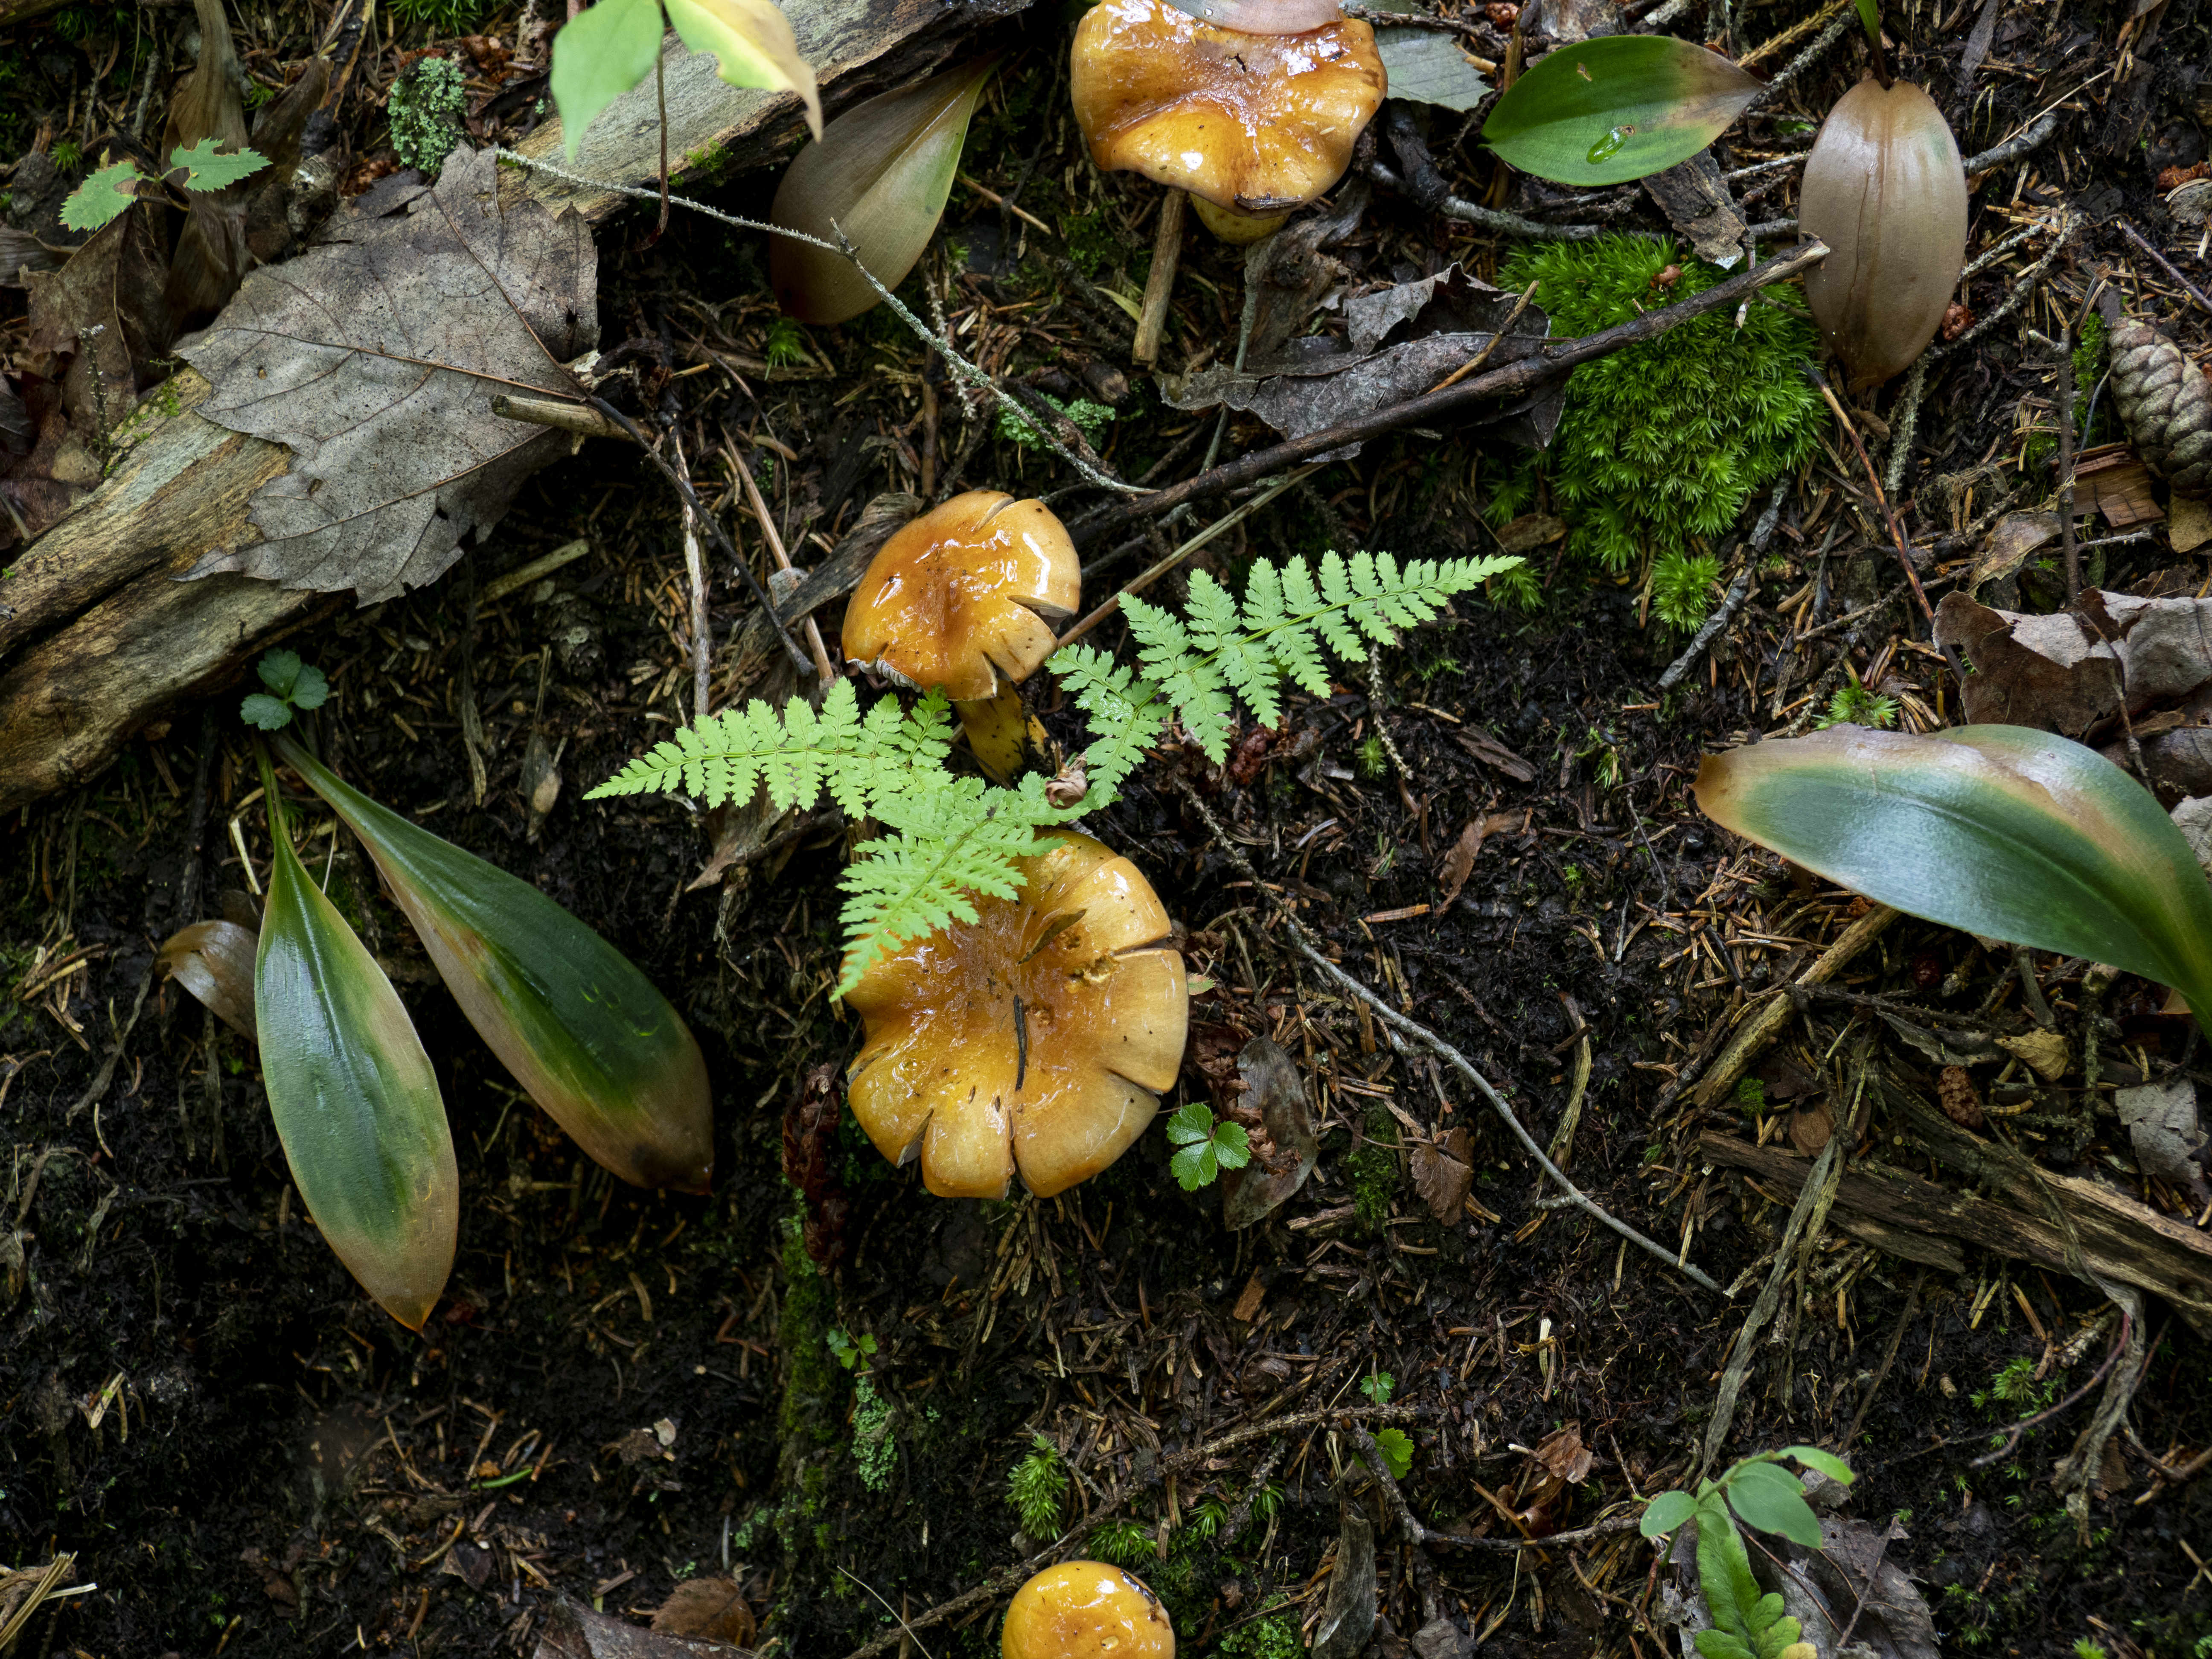 photograph of mushrooms and plants on forest floor